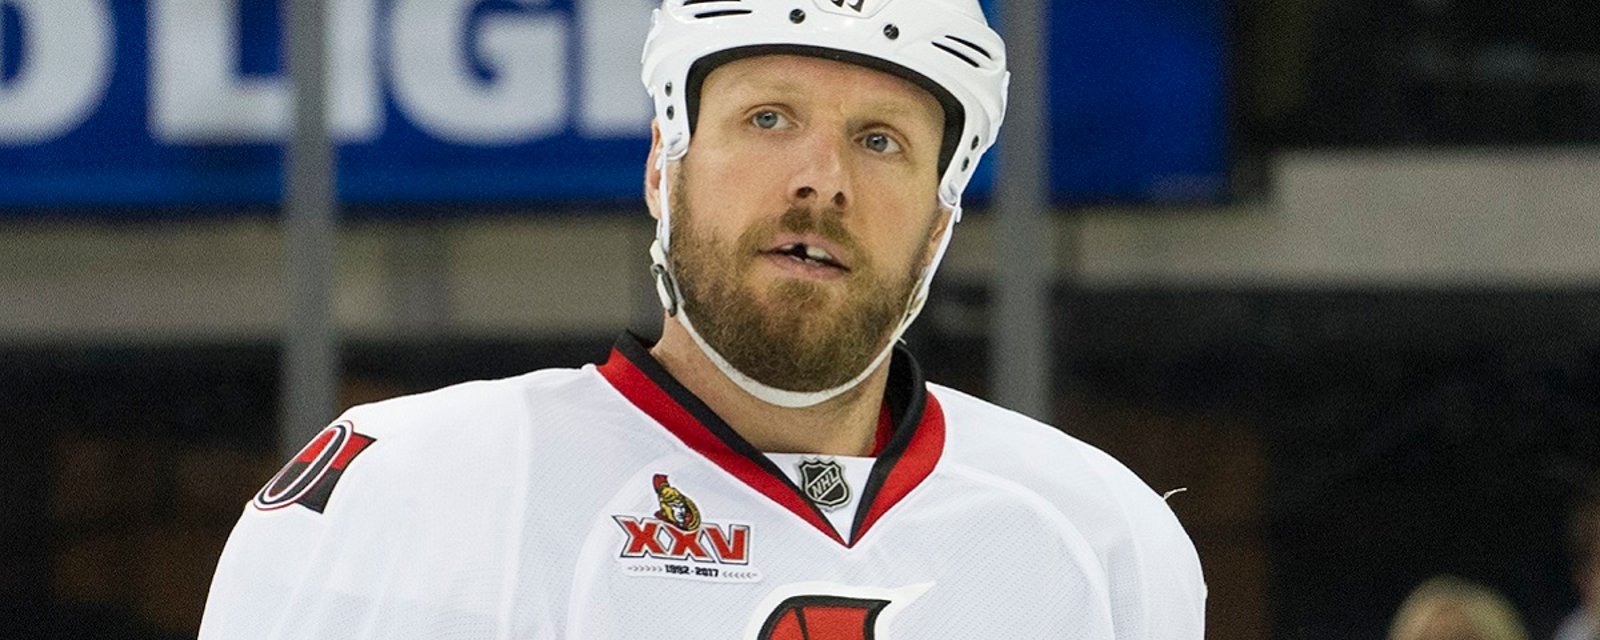 Marc Methot rips the NHL and players over All-Star Skills competition.